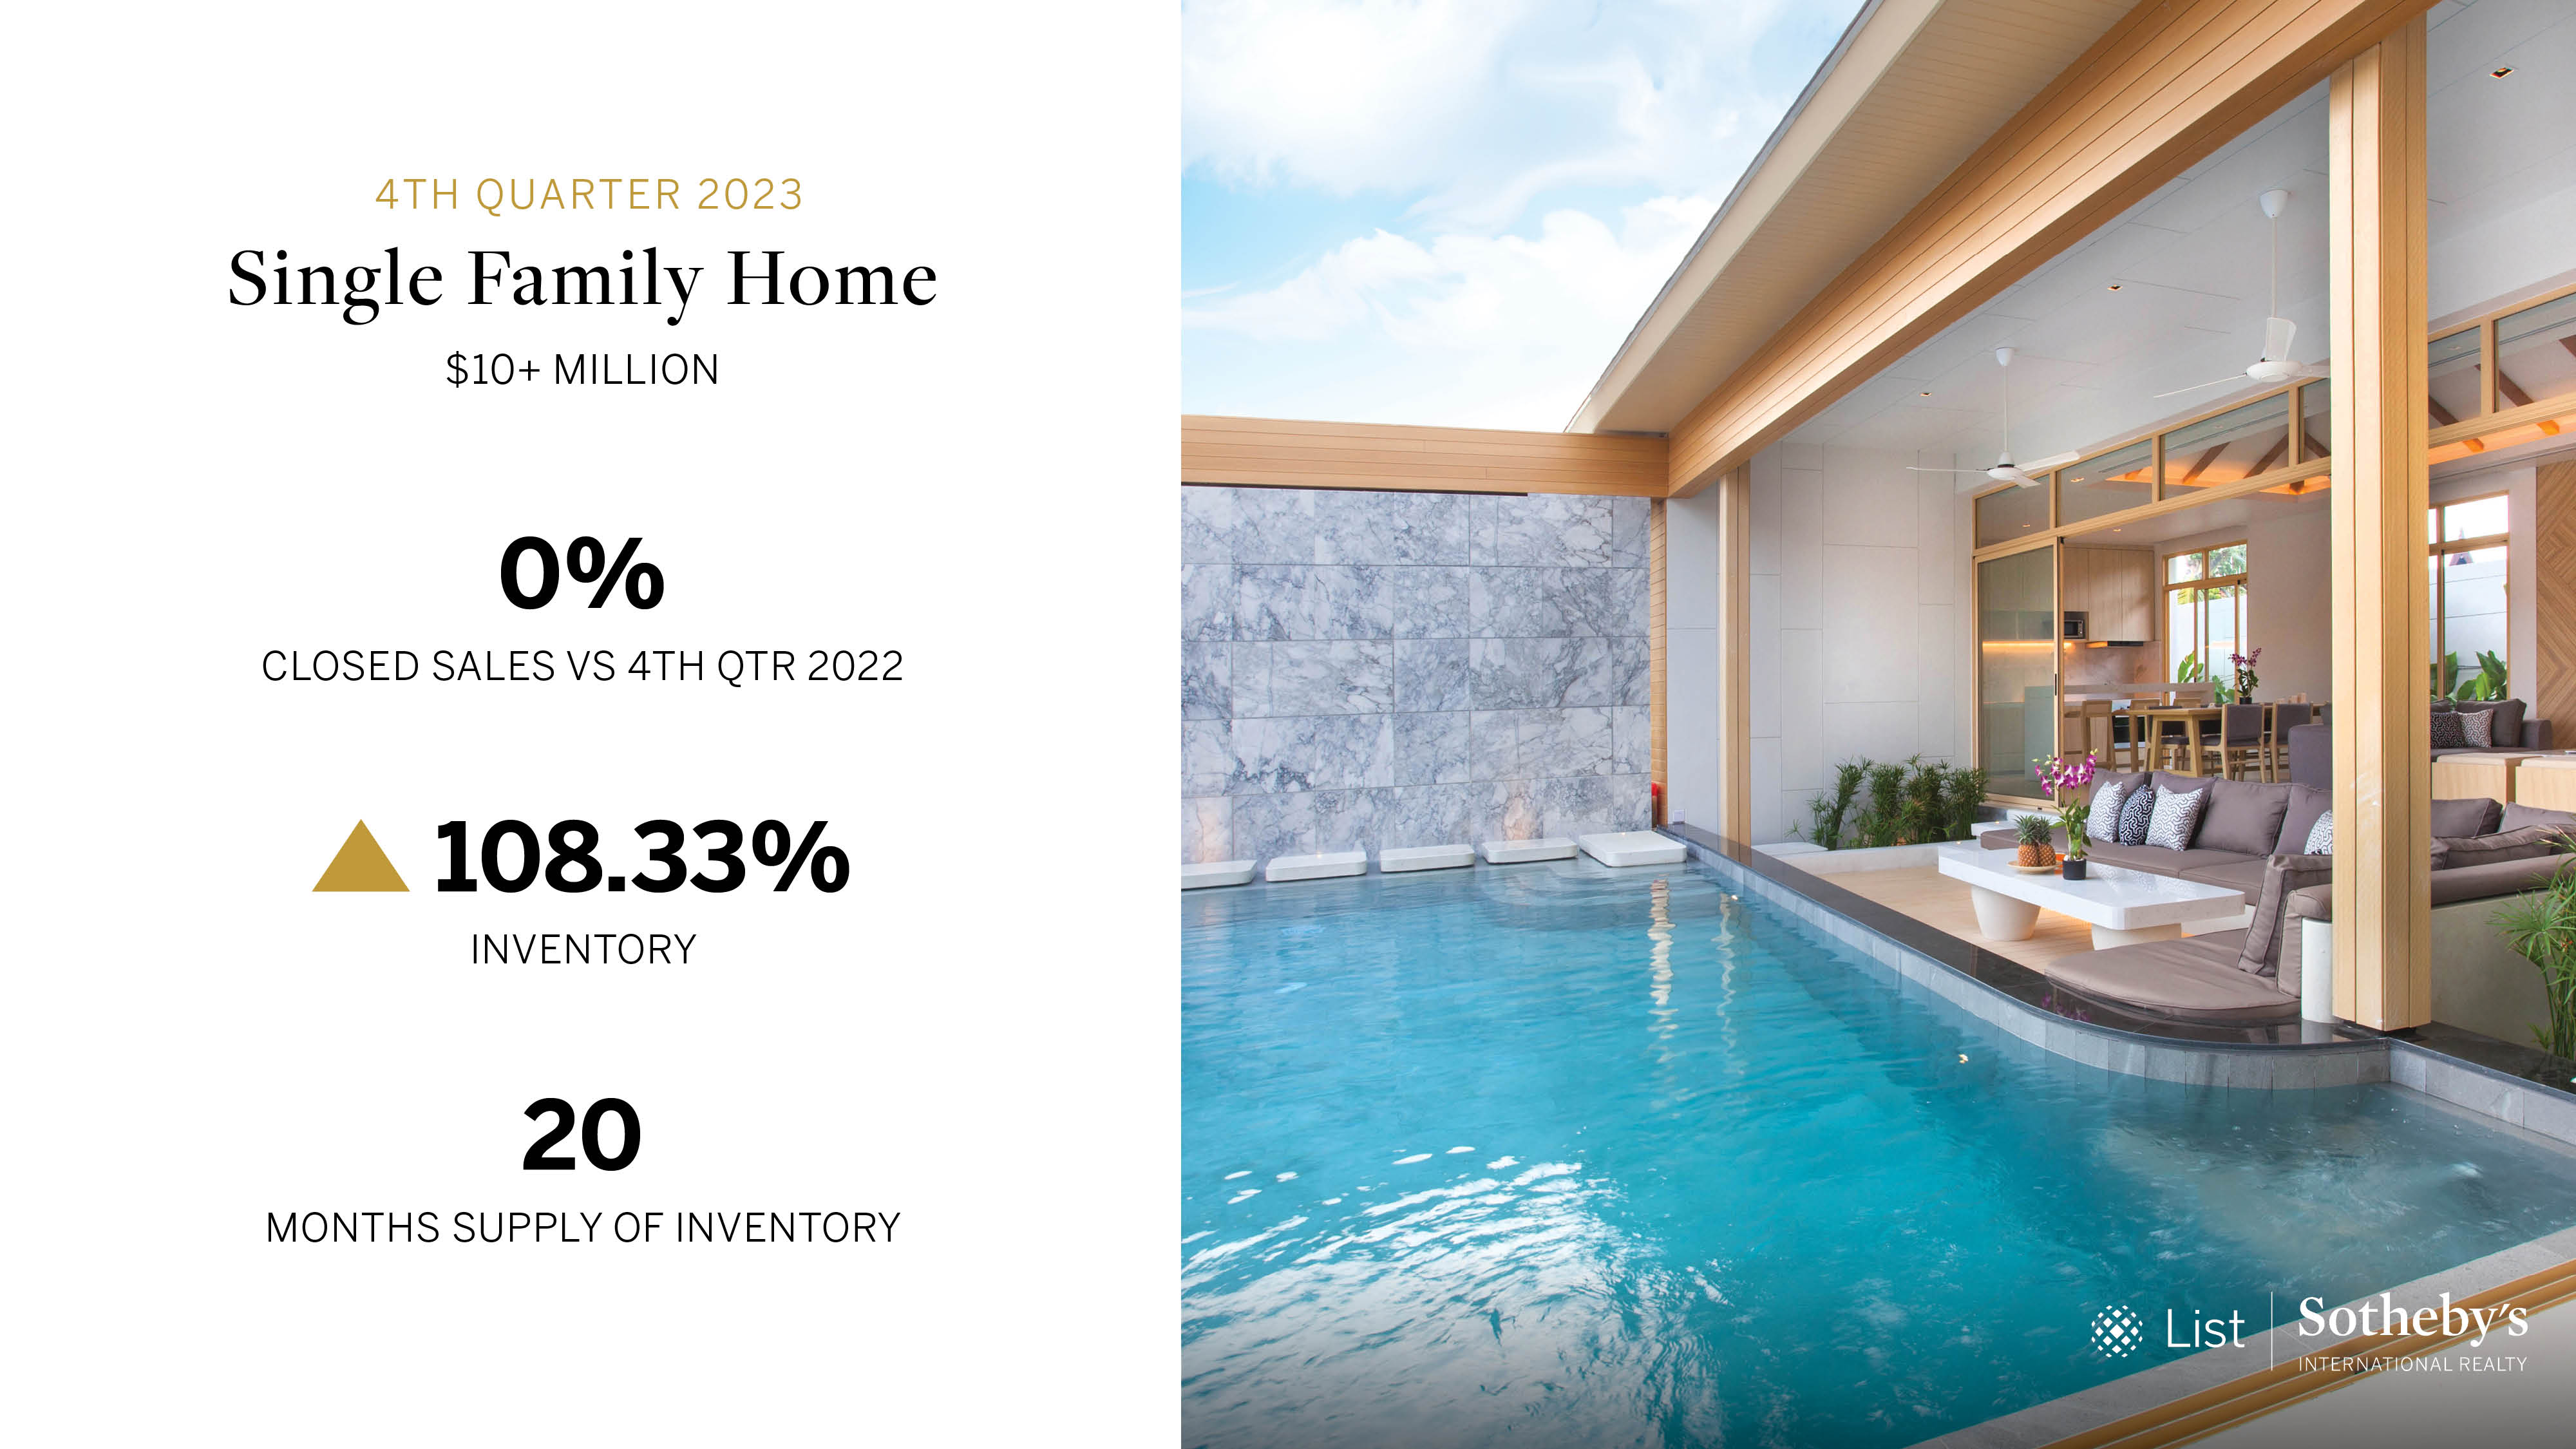 Image of an in-home pool on right, oahu luxury market stats on the left